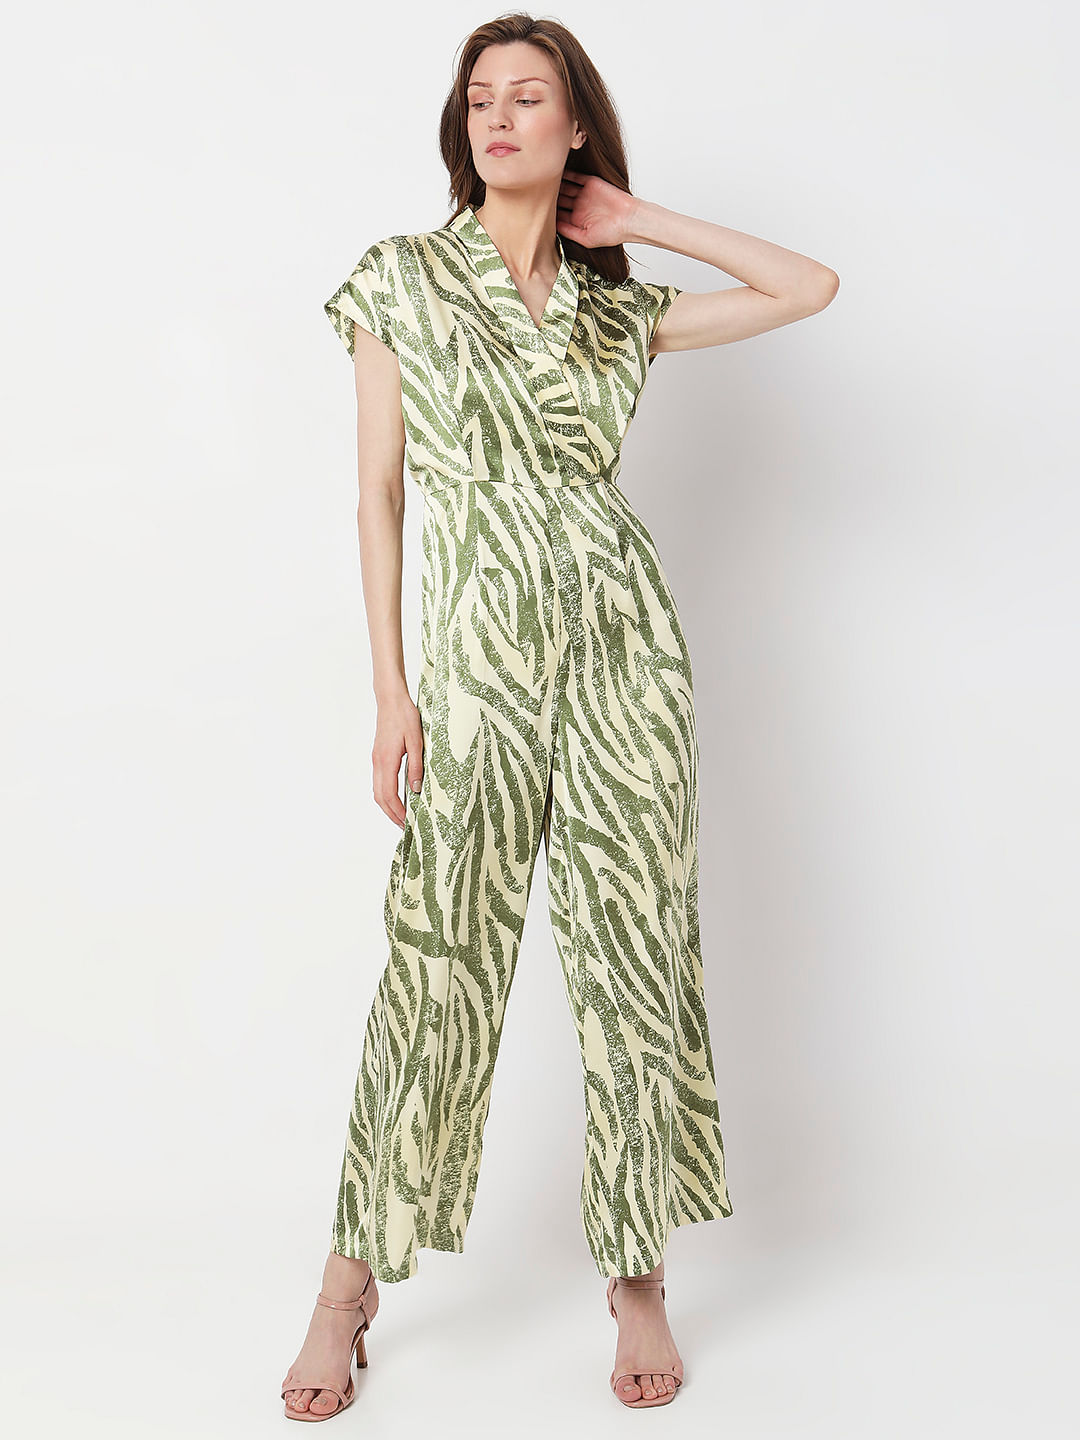 Buy Ketch BrownWhite Checked Jumpsuit for Women Online at Rs484  Ketch